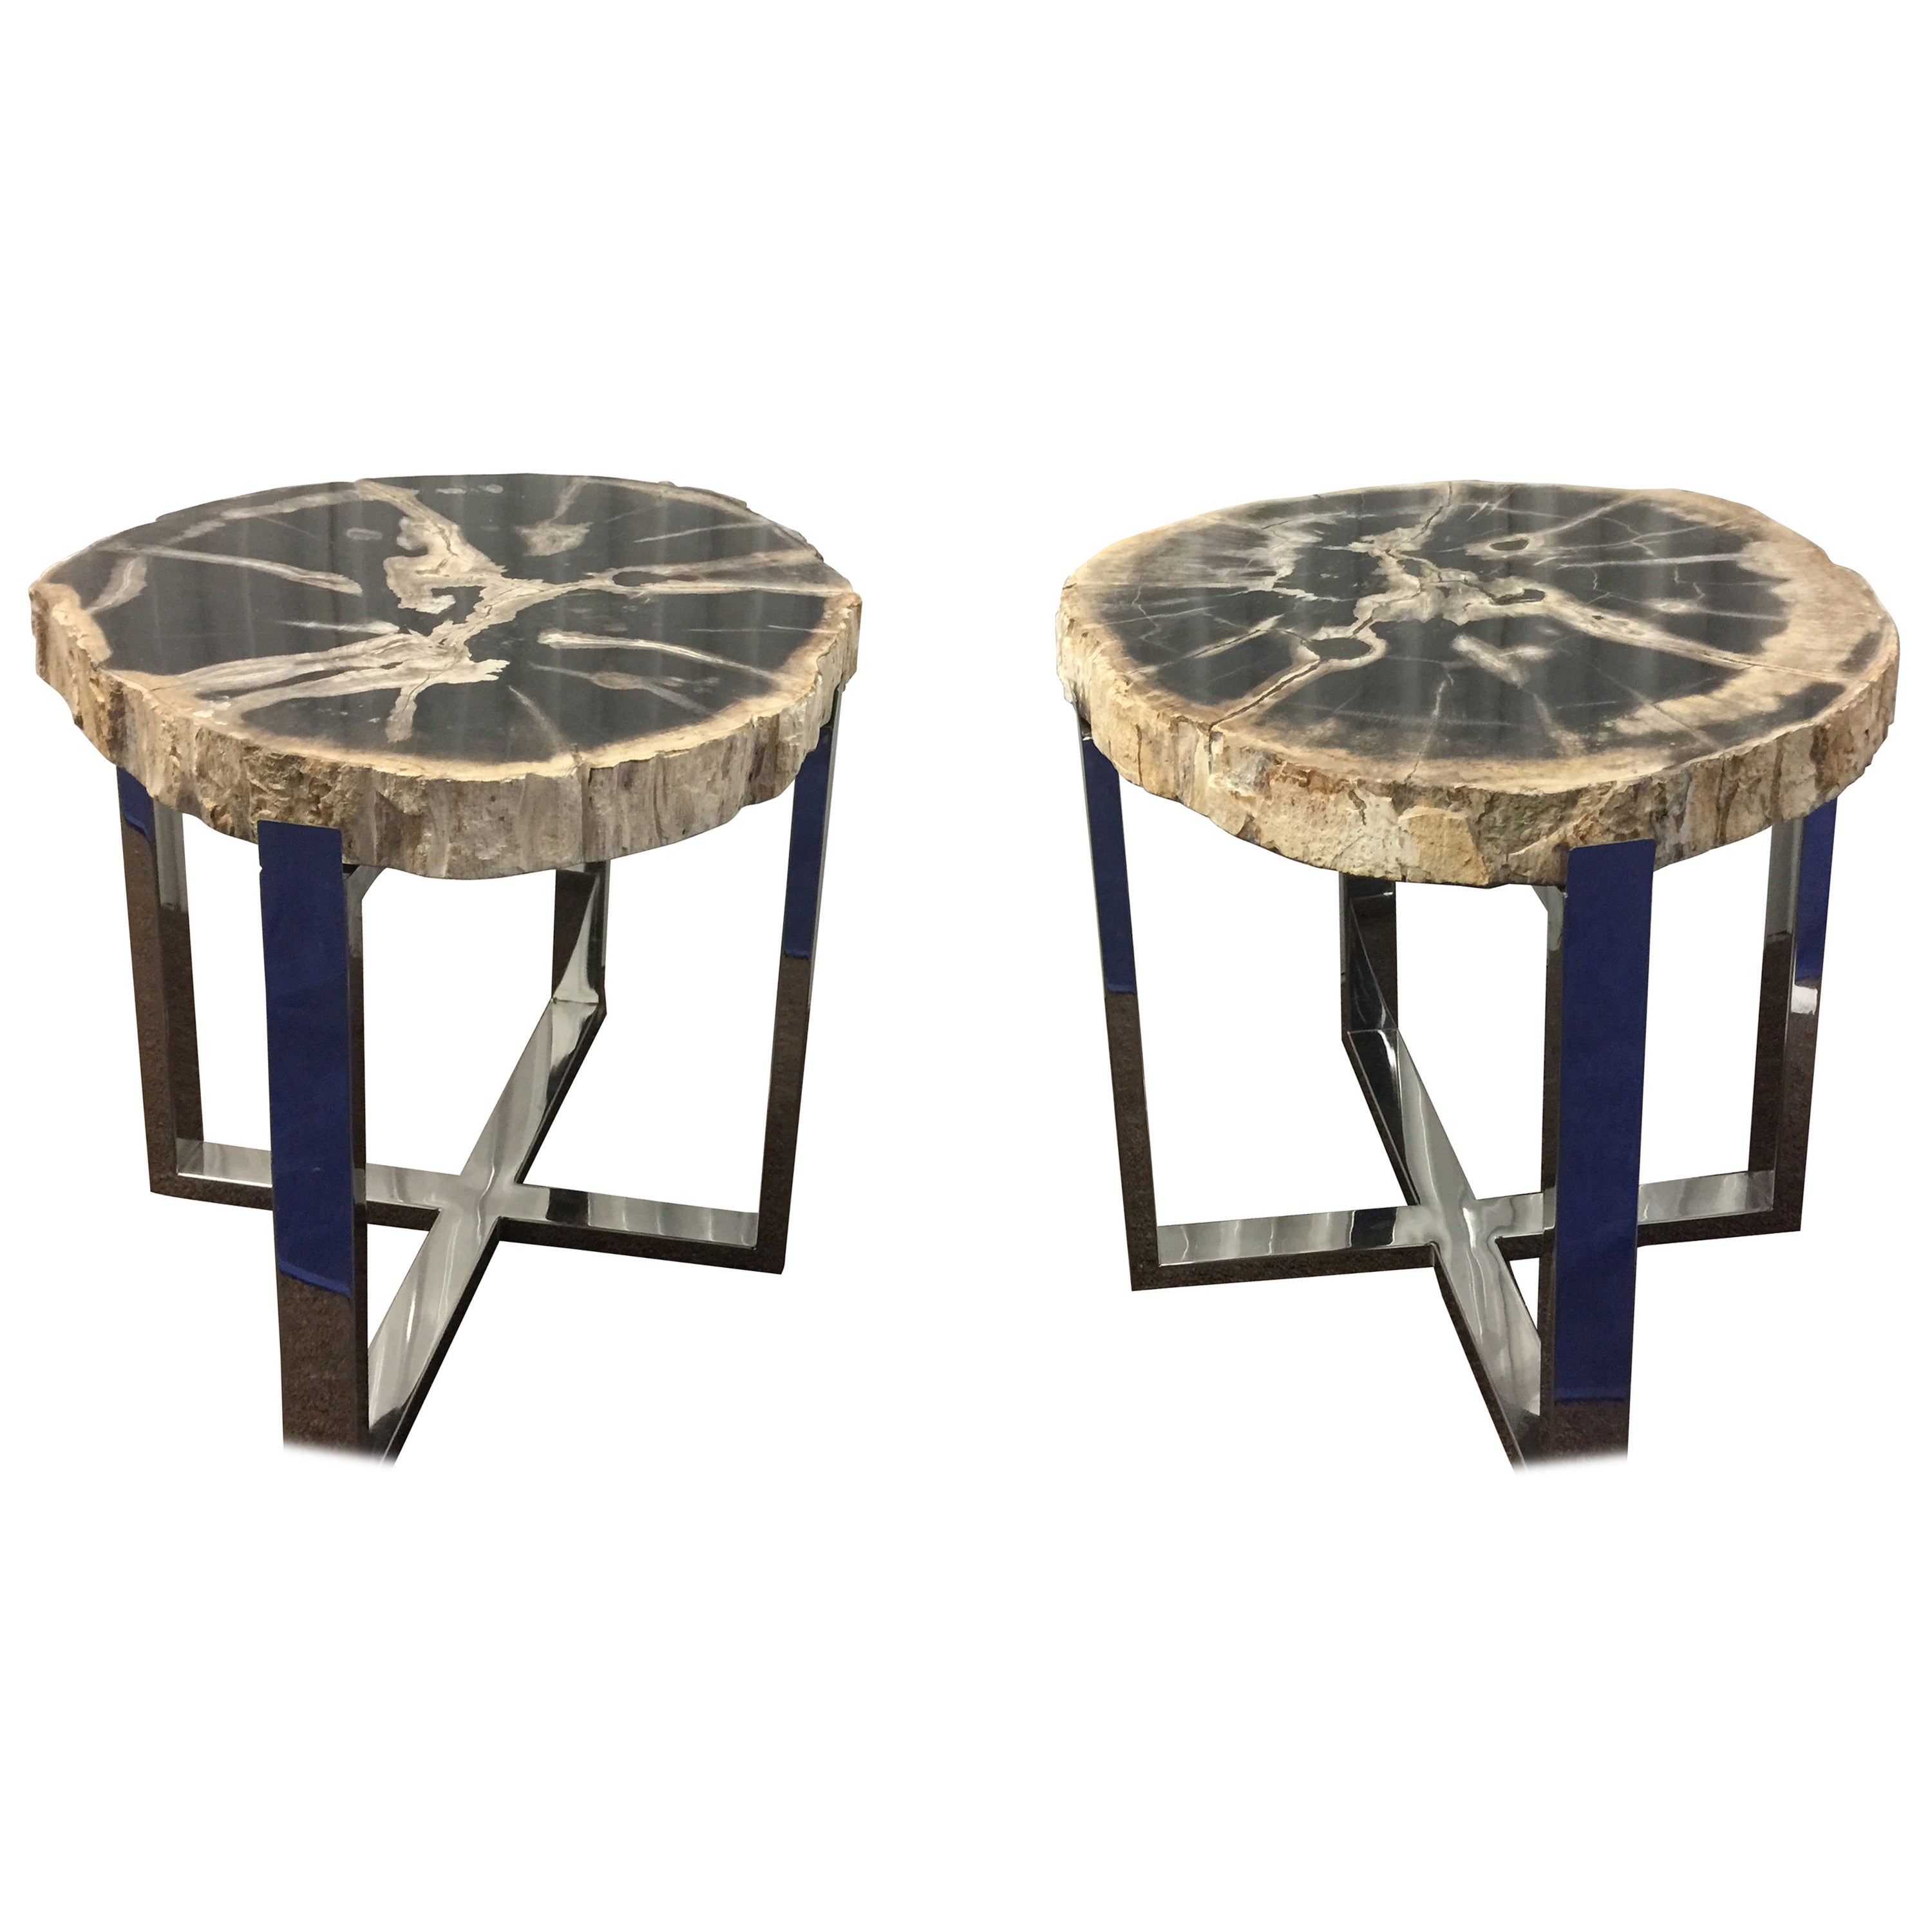 Organic Modern Style Pair of Petrified Wood and Chrome End or Side Tables